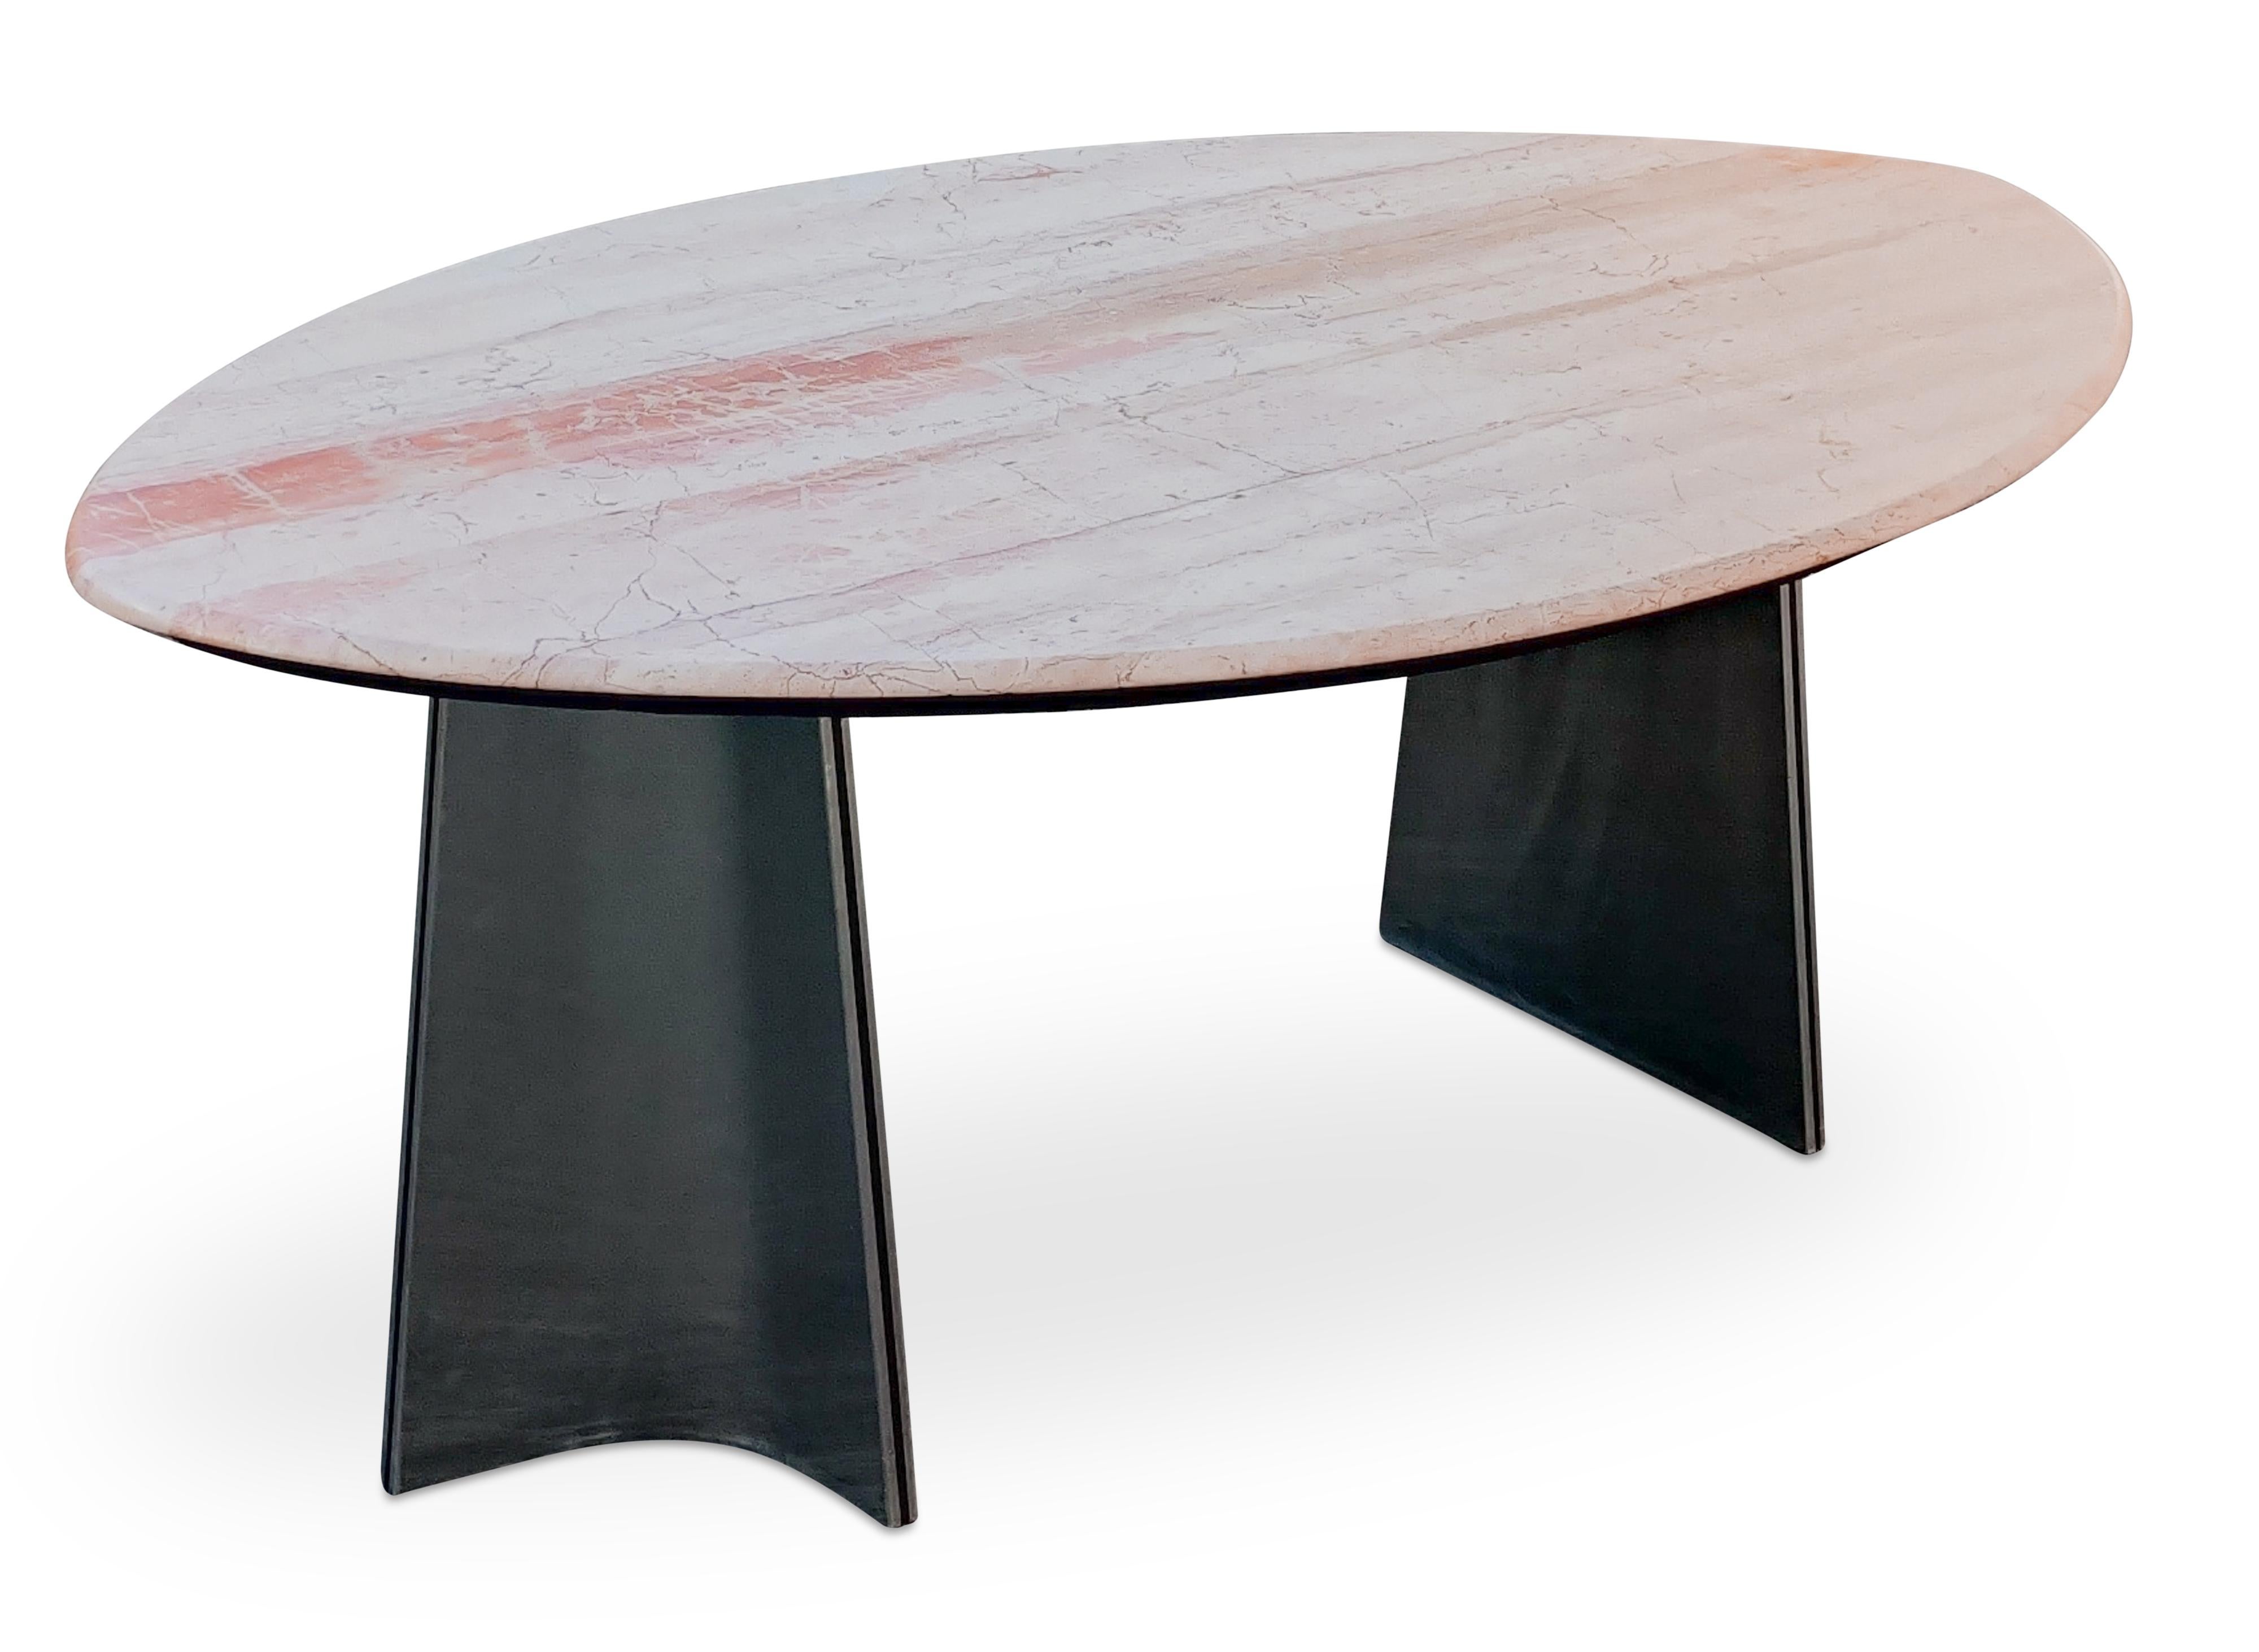 What distinguishes this table from all the other Luigi Saccardo for Arrmet dining table offerings is this fabulous large sharp-oval pink marble top! We say sharp-oval becuase of the elongated ends and the bullnosed edge treatment. Also prominent are